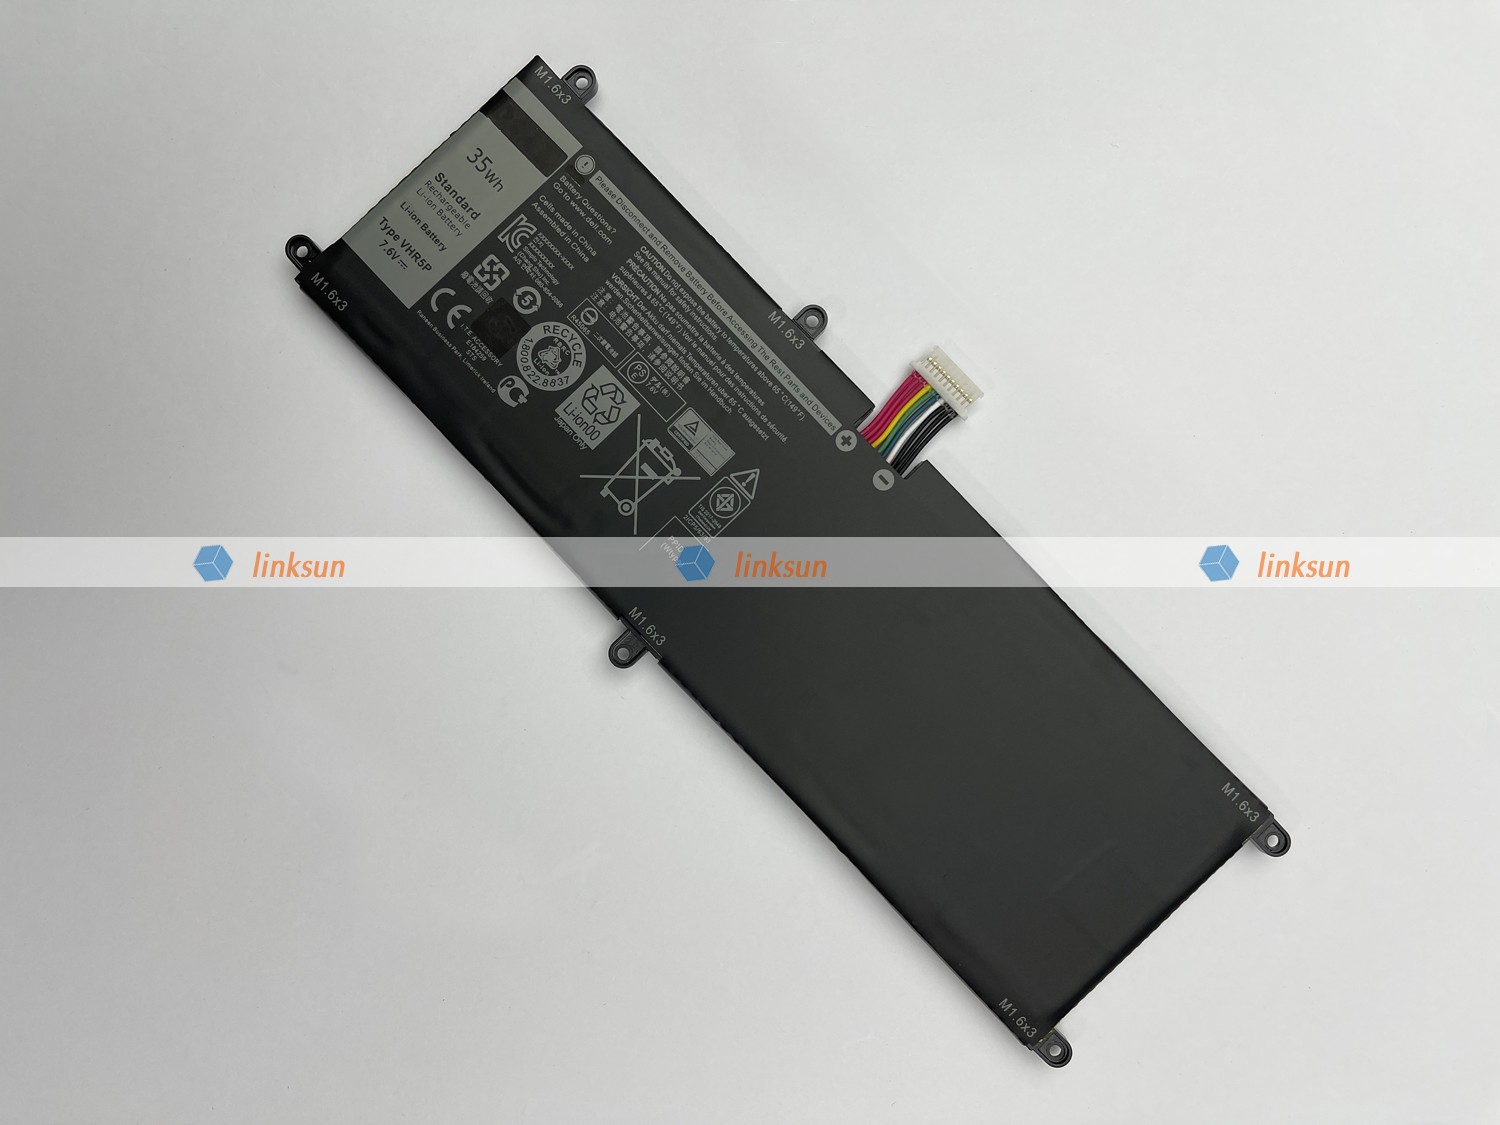 VHR5P laptop battery inclined